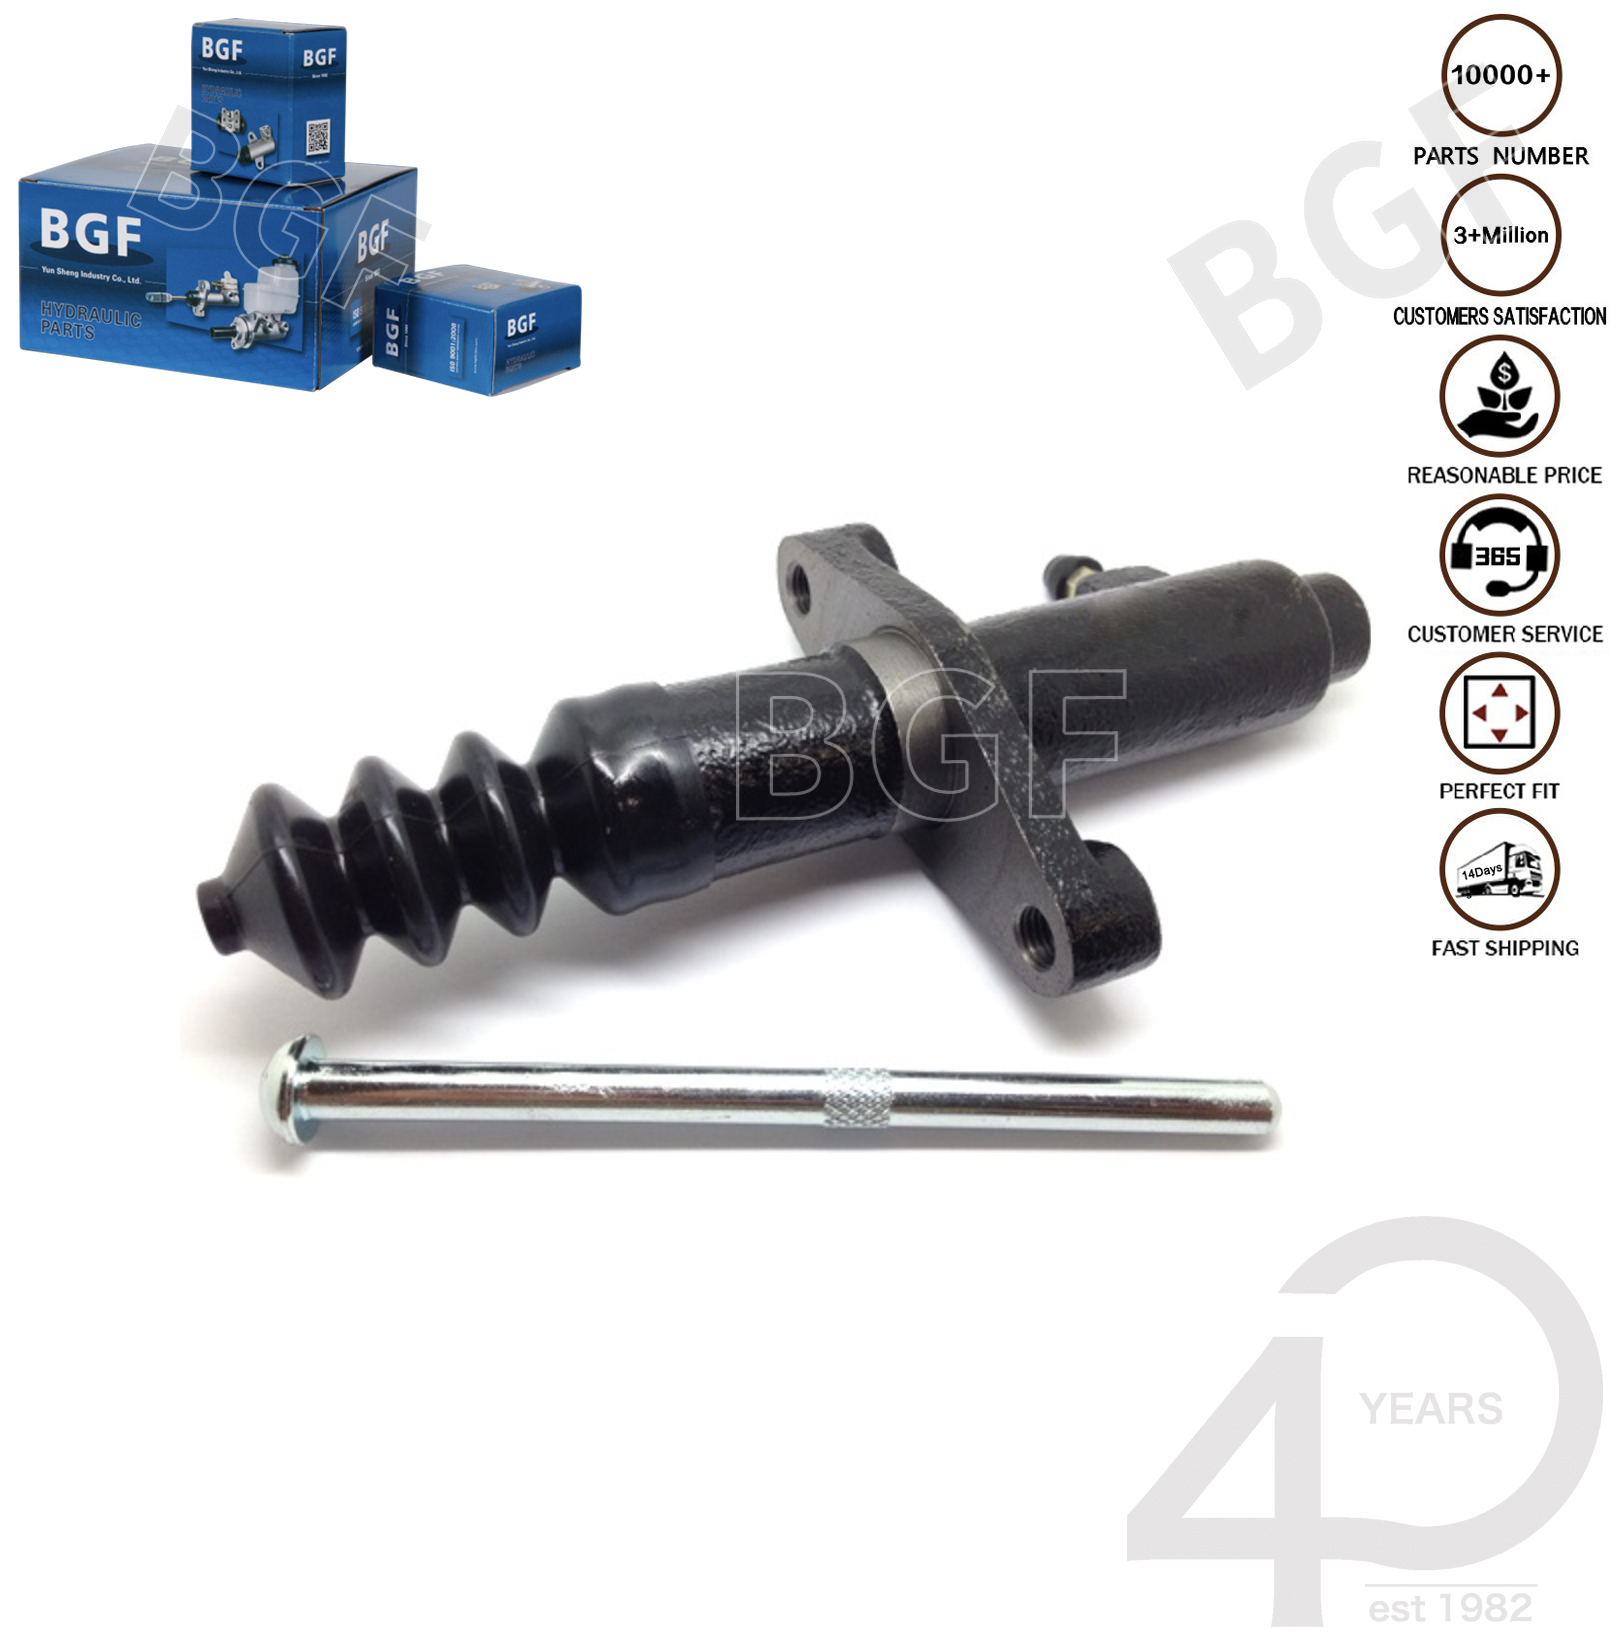 I-BGF CLUCTH SLAVE CYLINDER FOR MITSUBISHI CANTER FUSO (FB) 4D33-4A 4.2L DIESEL 96-01 ROSA BUS 2.6L DIESEL 95-96 HYUNDAI COUNTY BUS L+R 98-09 MIGHTY TRUCK, 3.5RTON 3.5. 98-09 ME602994 ME...